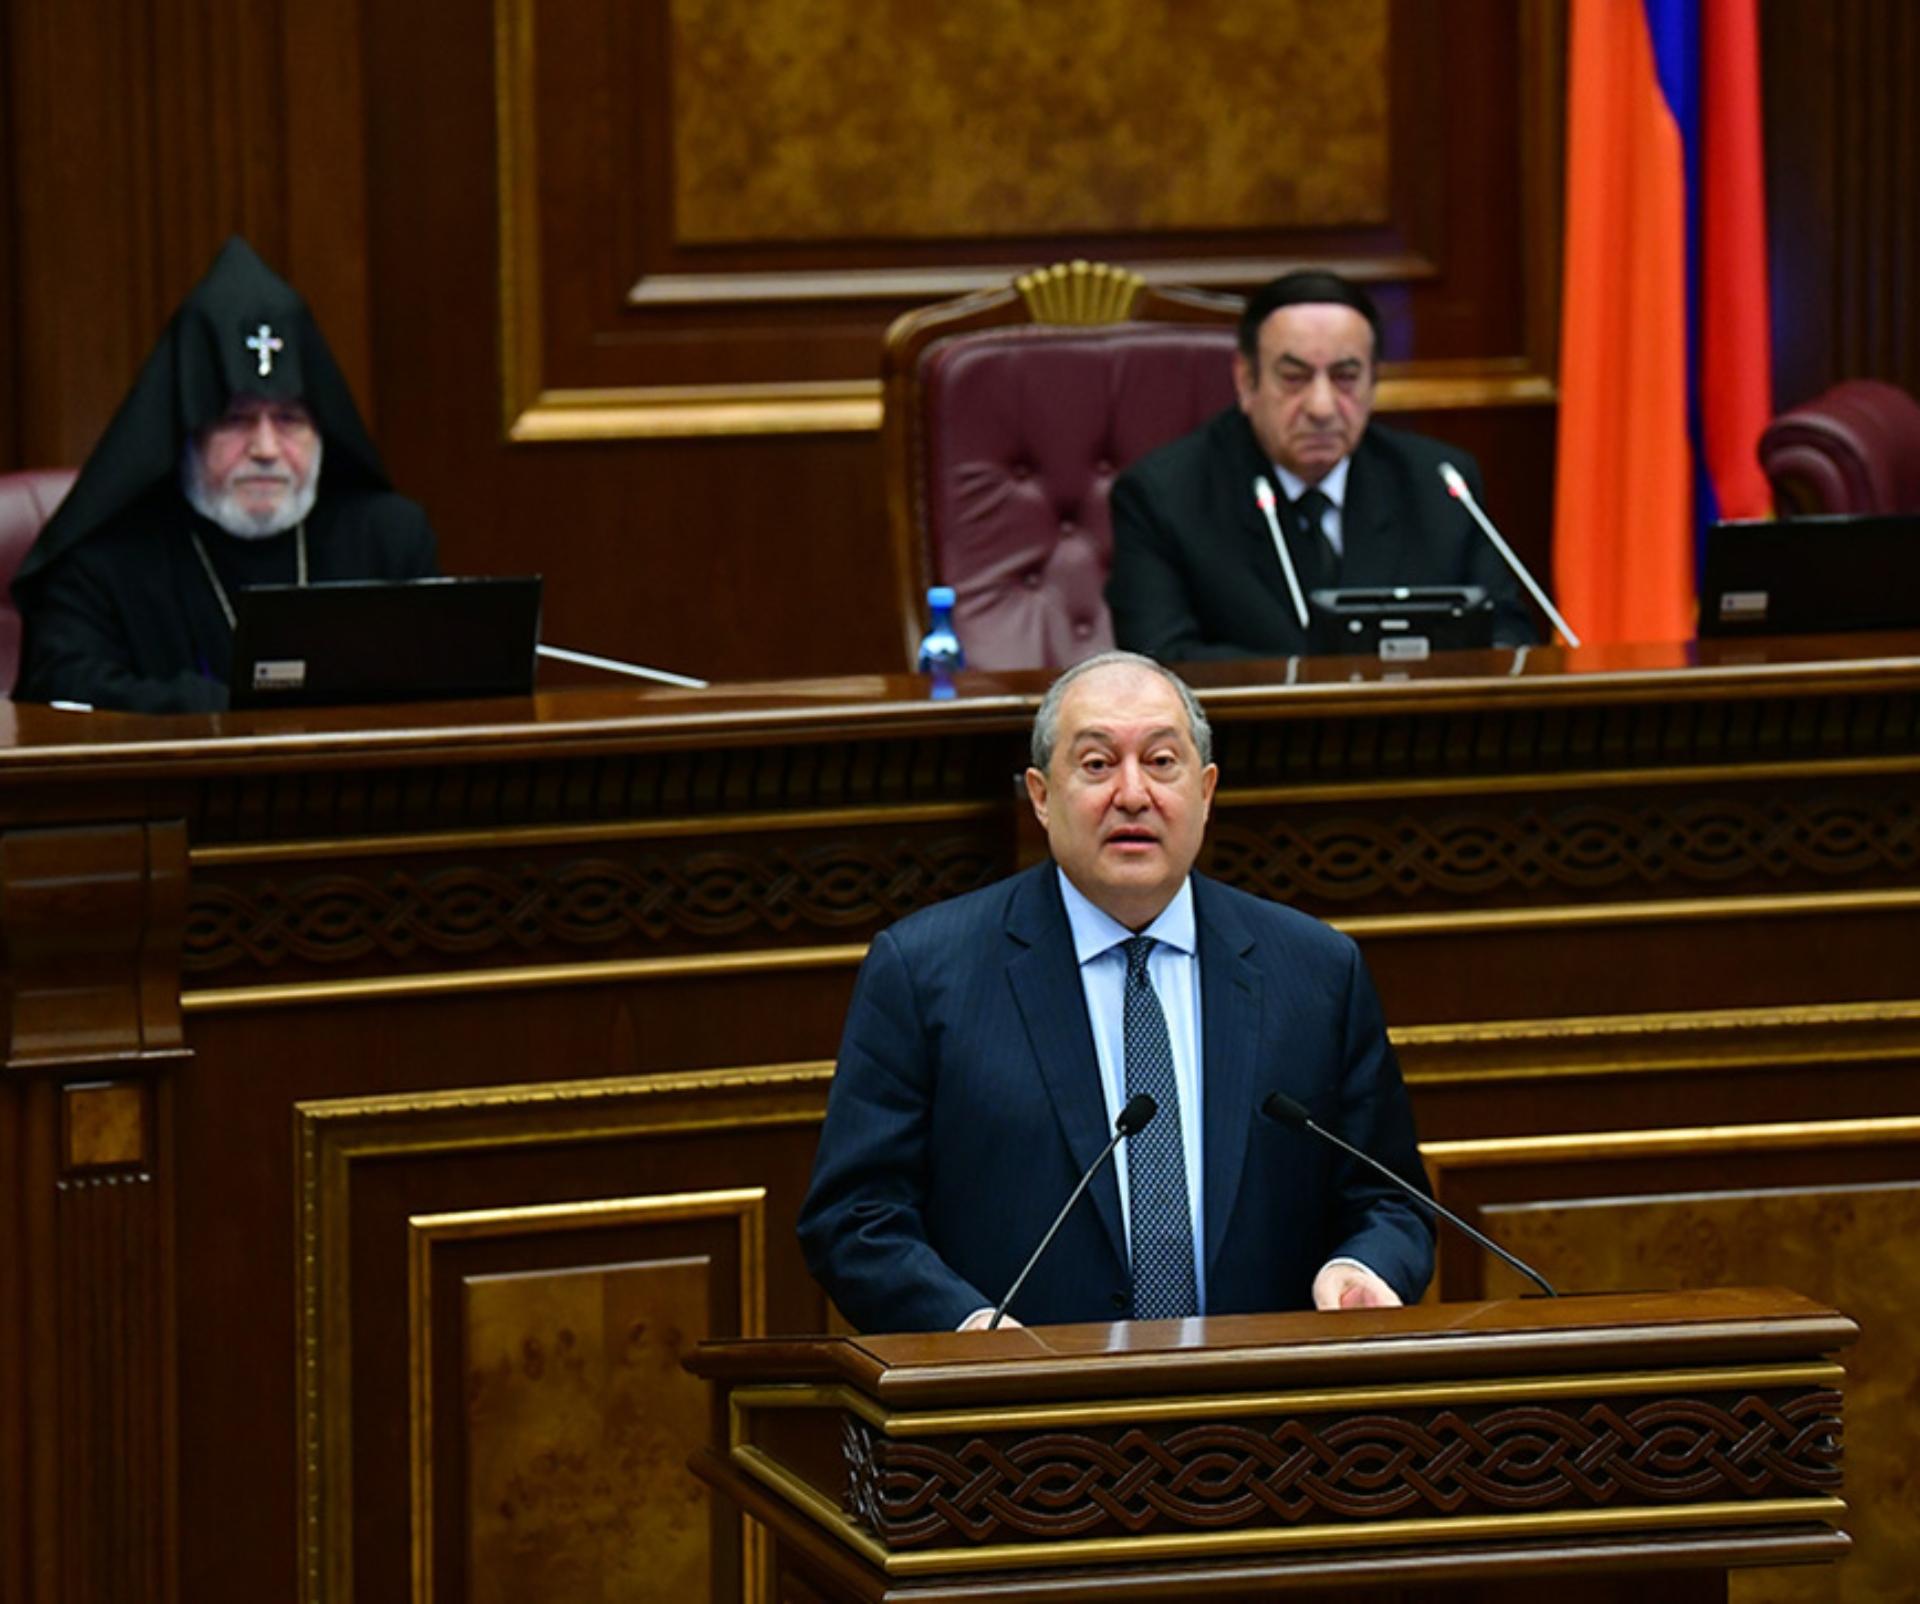 December 9 Elections Have Given a New Legitimacy to the Parliament